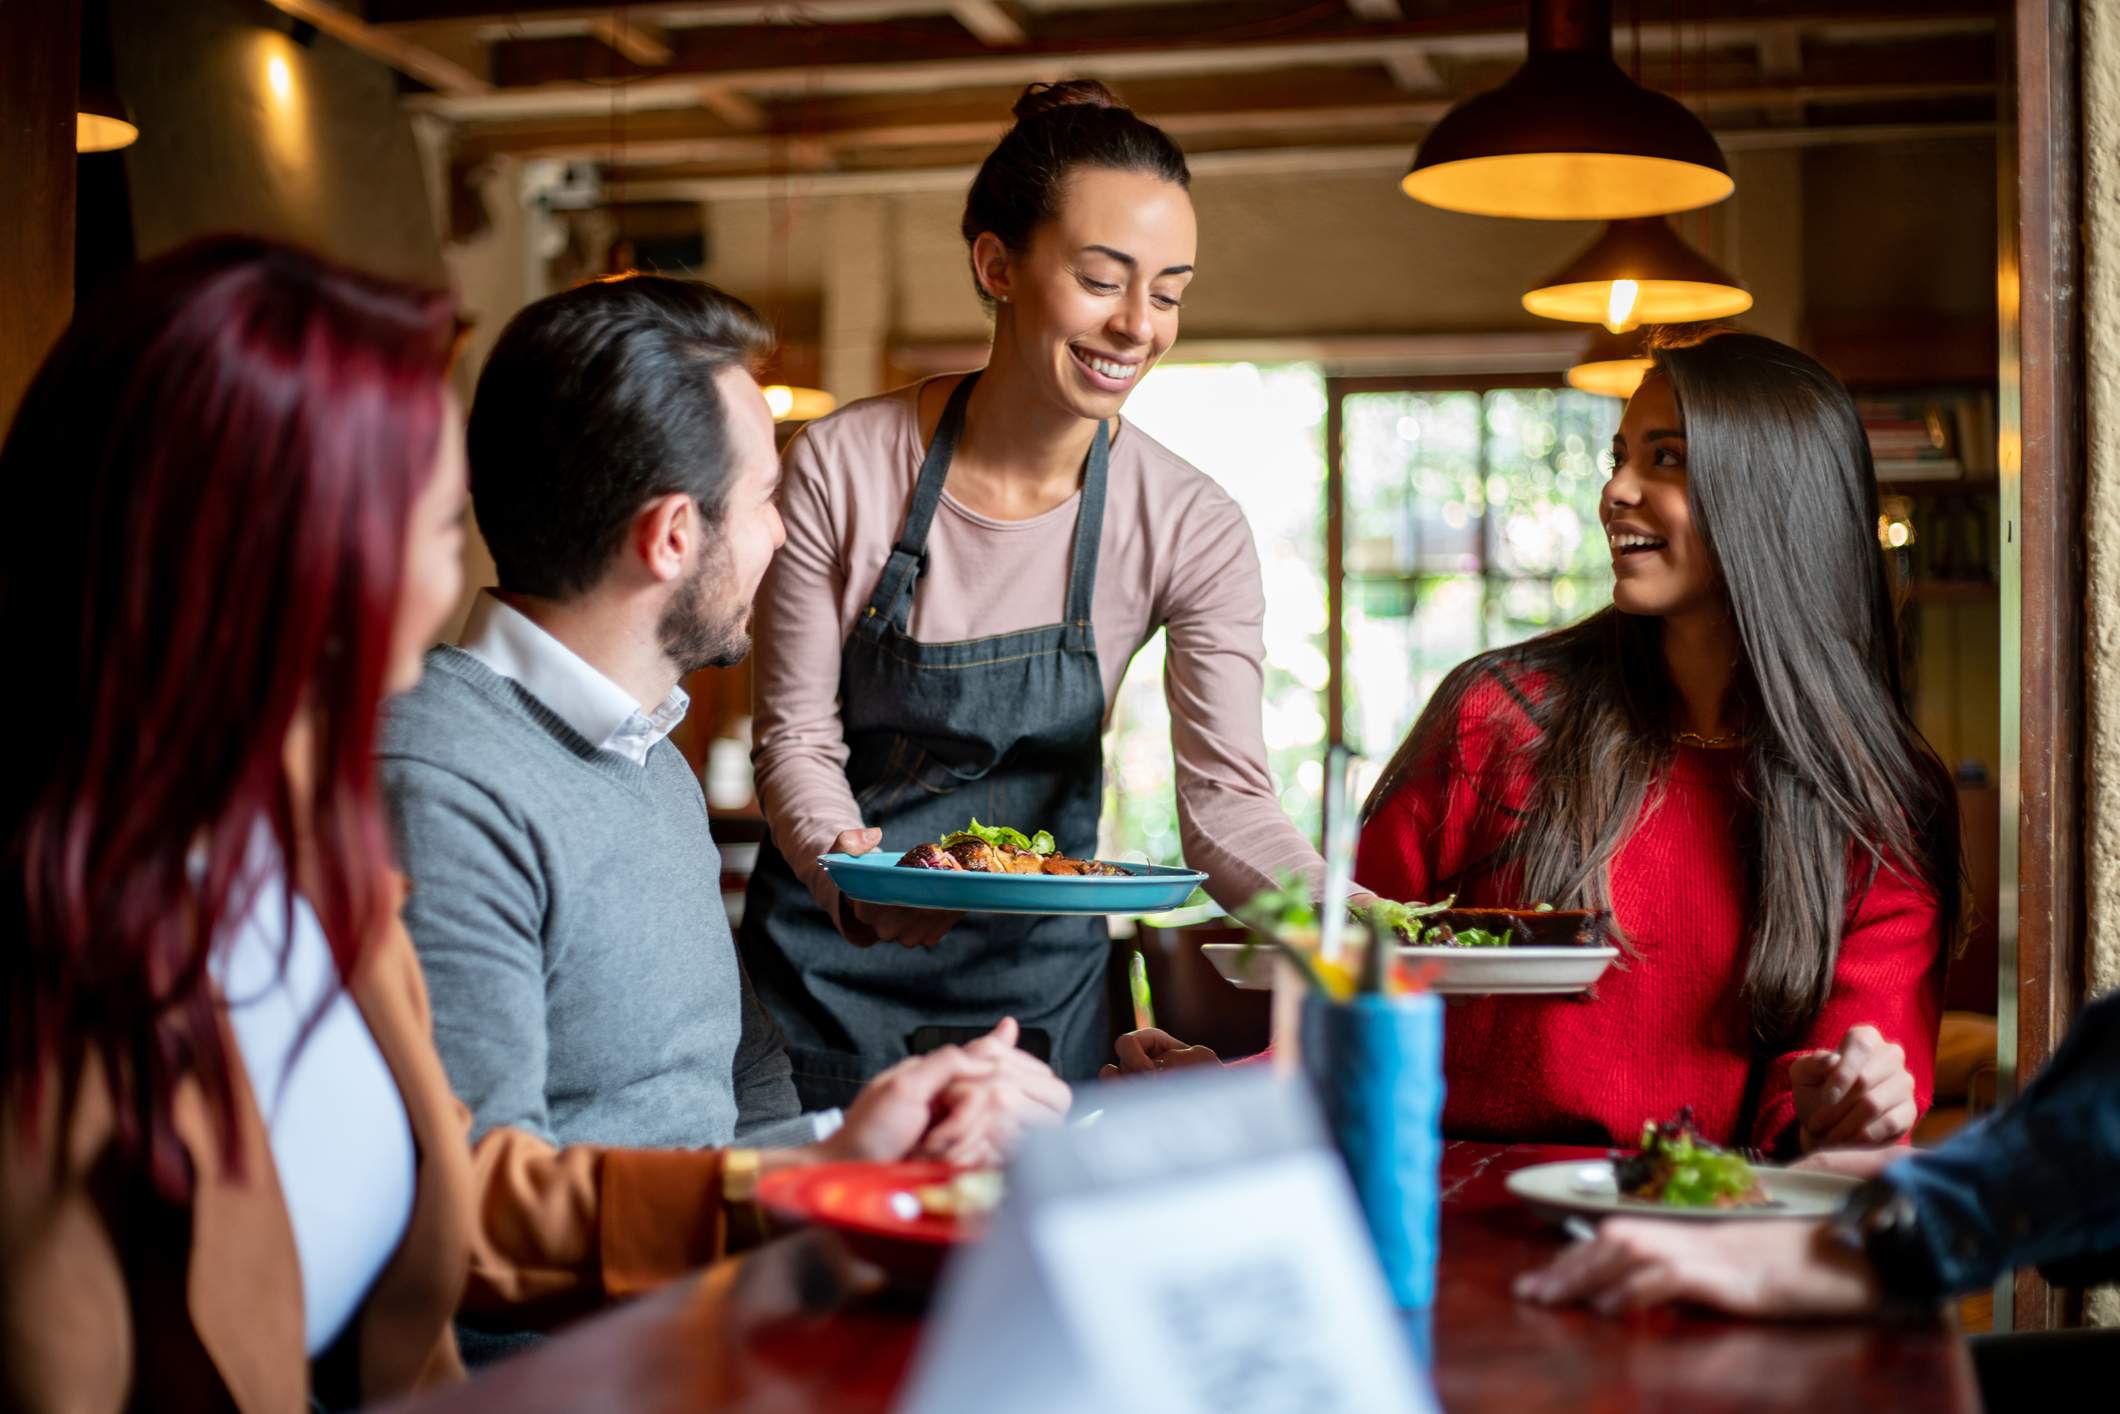 Image depicts a server bringing two plates of food to a table of people. The server is wearing a long sleeve shirt and a denim apron. The people at the table are of varying races and genders. They are all smiling. 